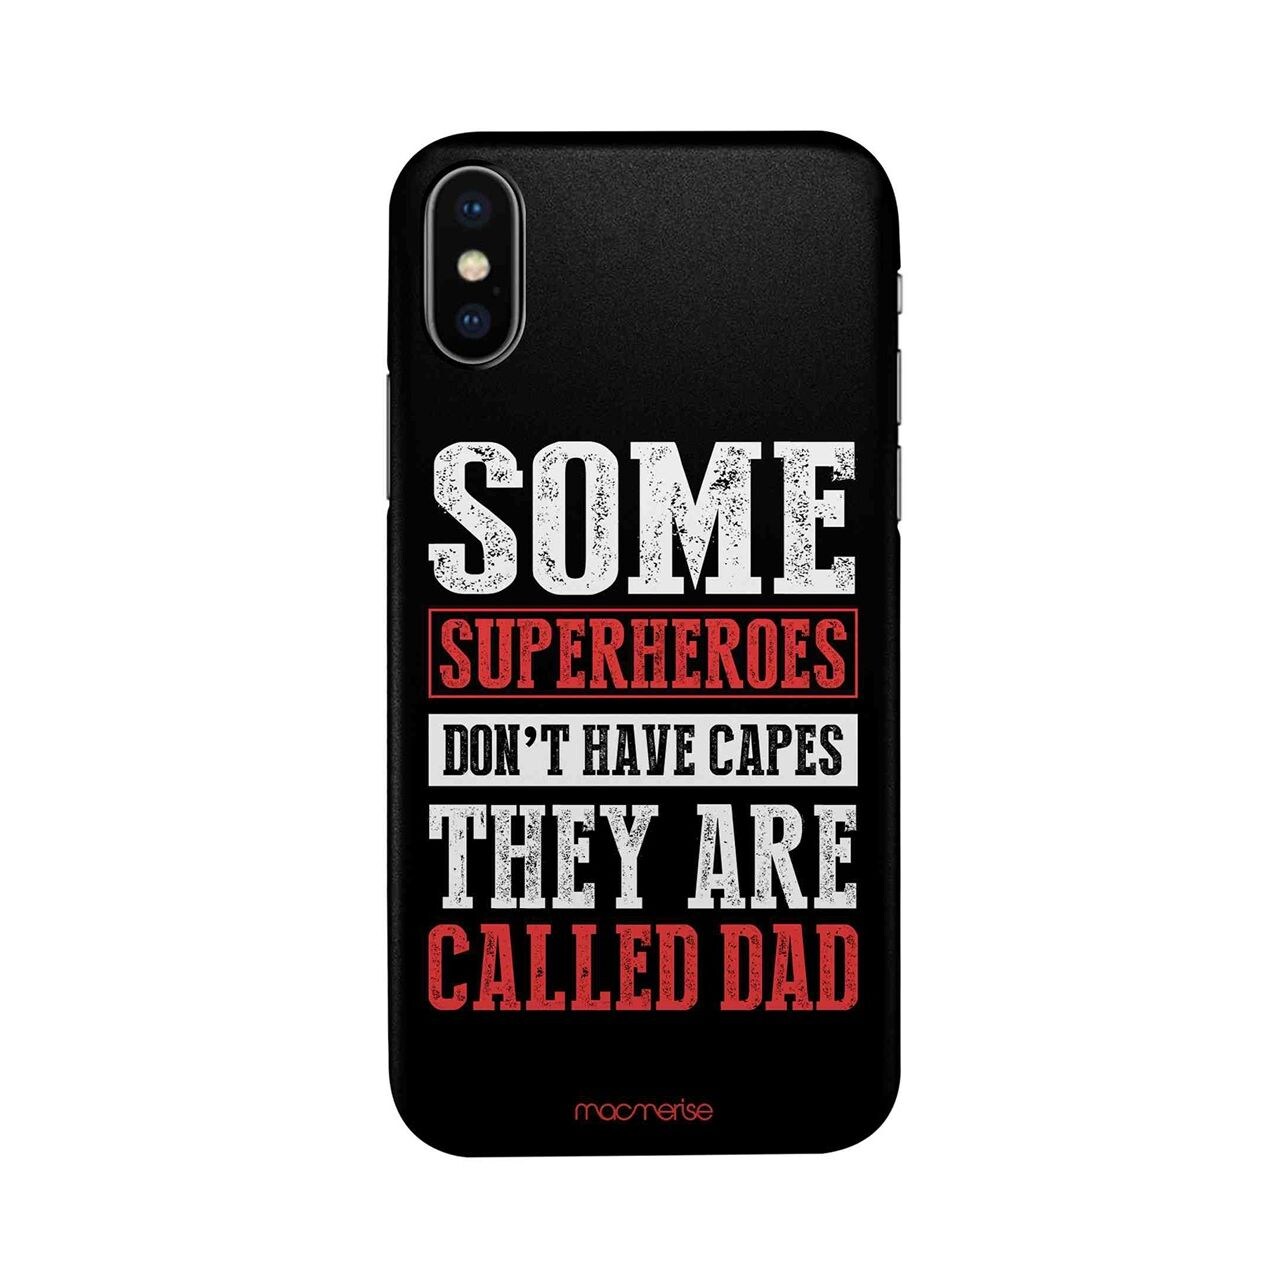 Macmerise They Are Called Superhero - Sleek Case for iPhone XS